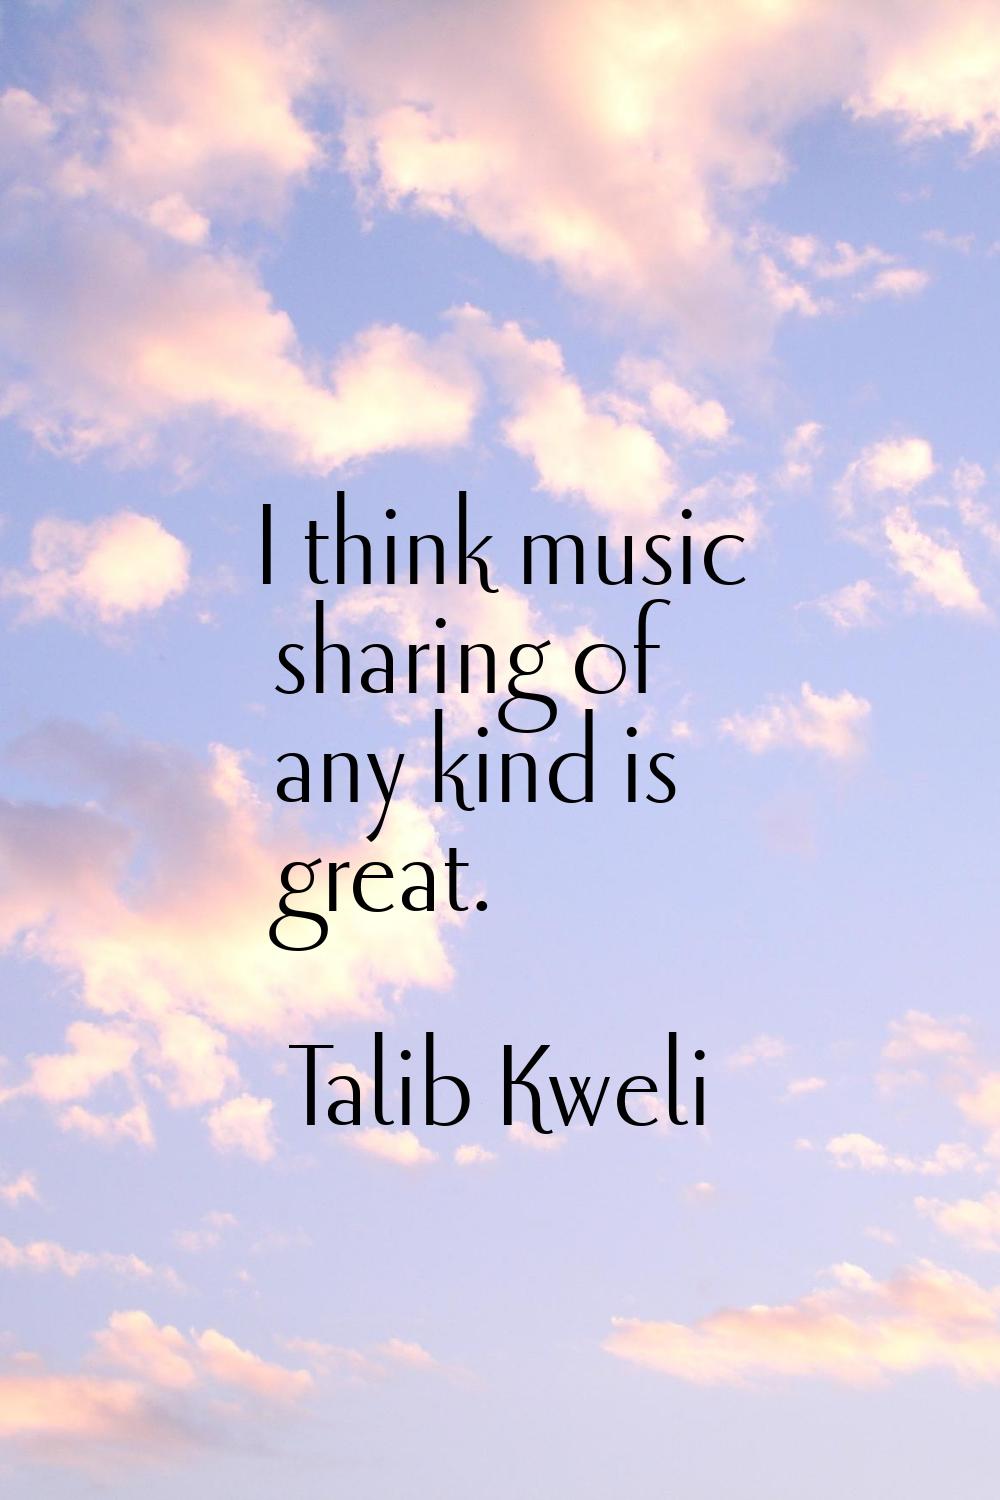 I think music sharing of any kind is great.